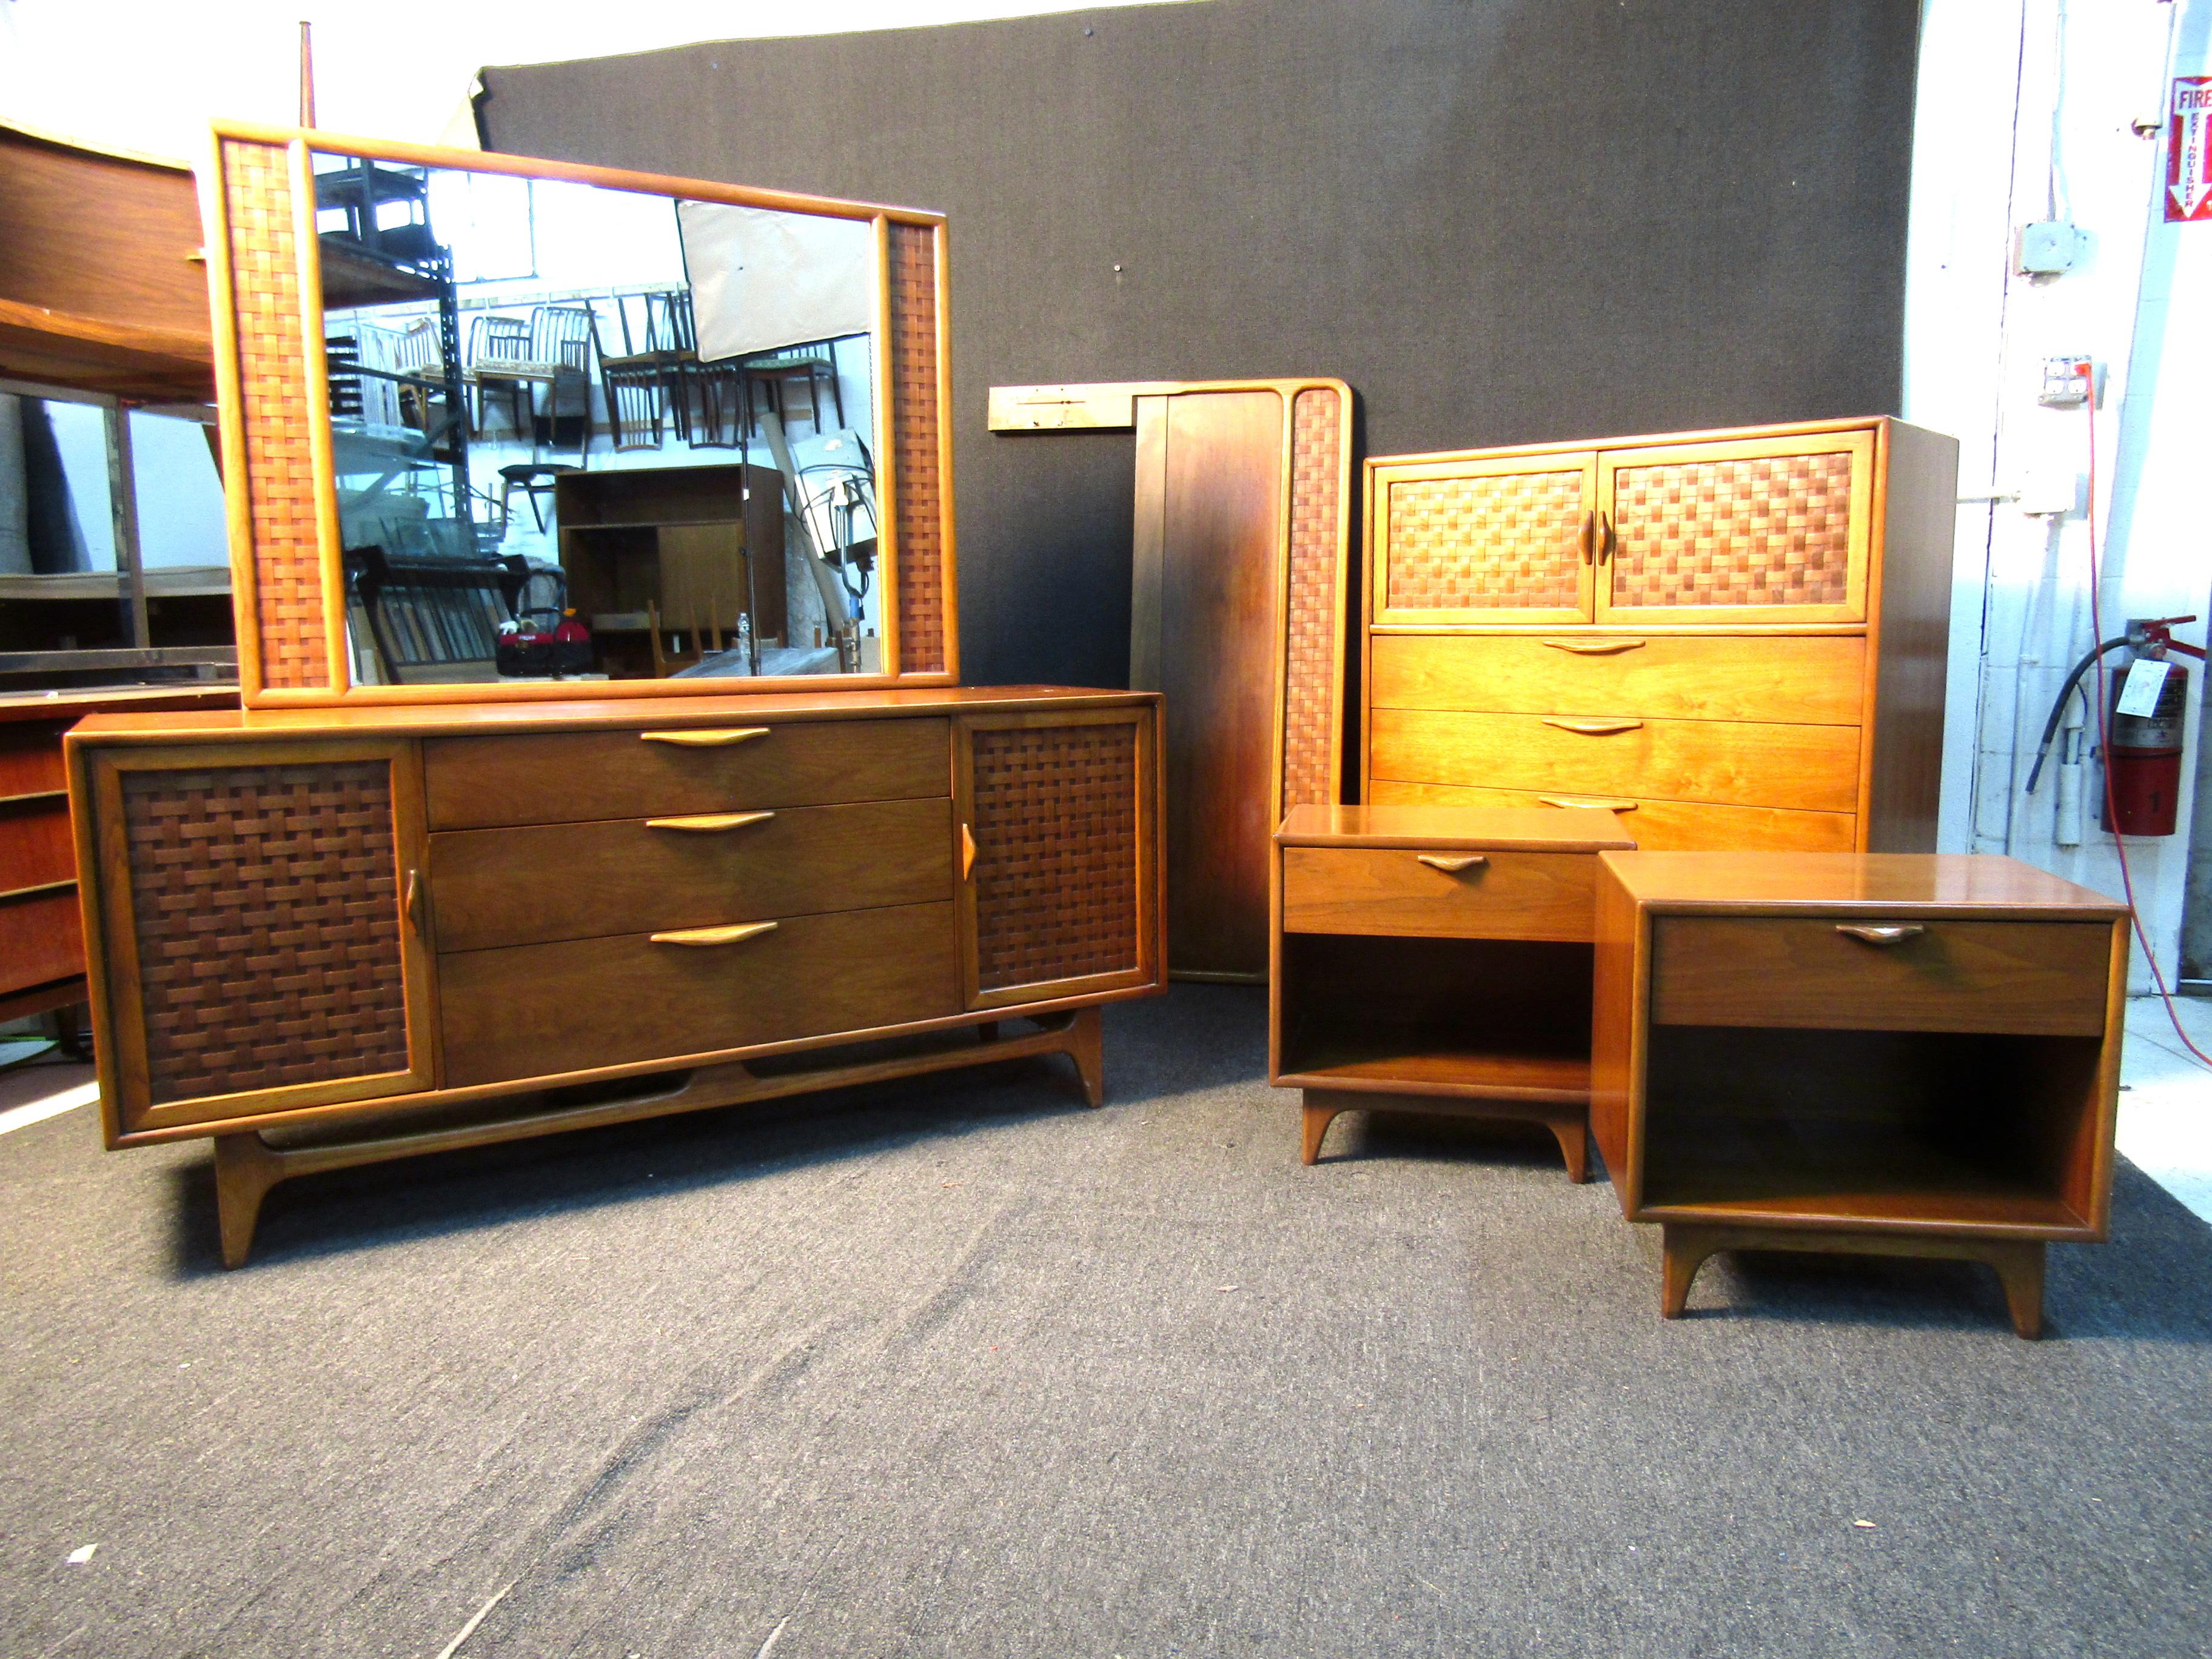 Stunning Mid century Lane four piece dresser set. The set features an elegant basket weave finish design, rectangular drawers with built in handles, and clean dovetail drawers. 

Please confirm item location (NY or NJ).

Mirror-